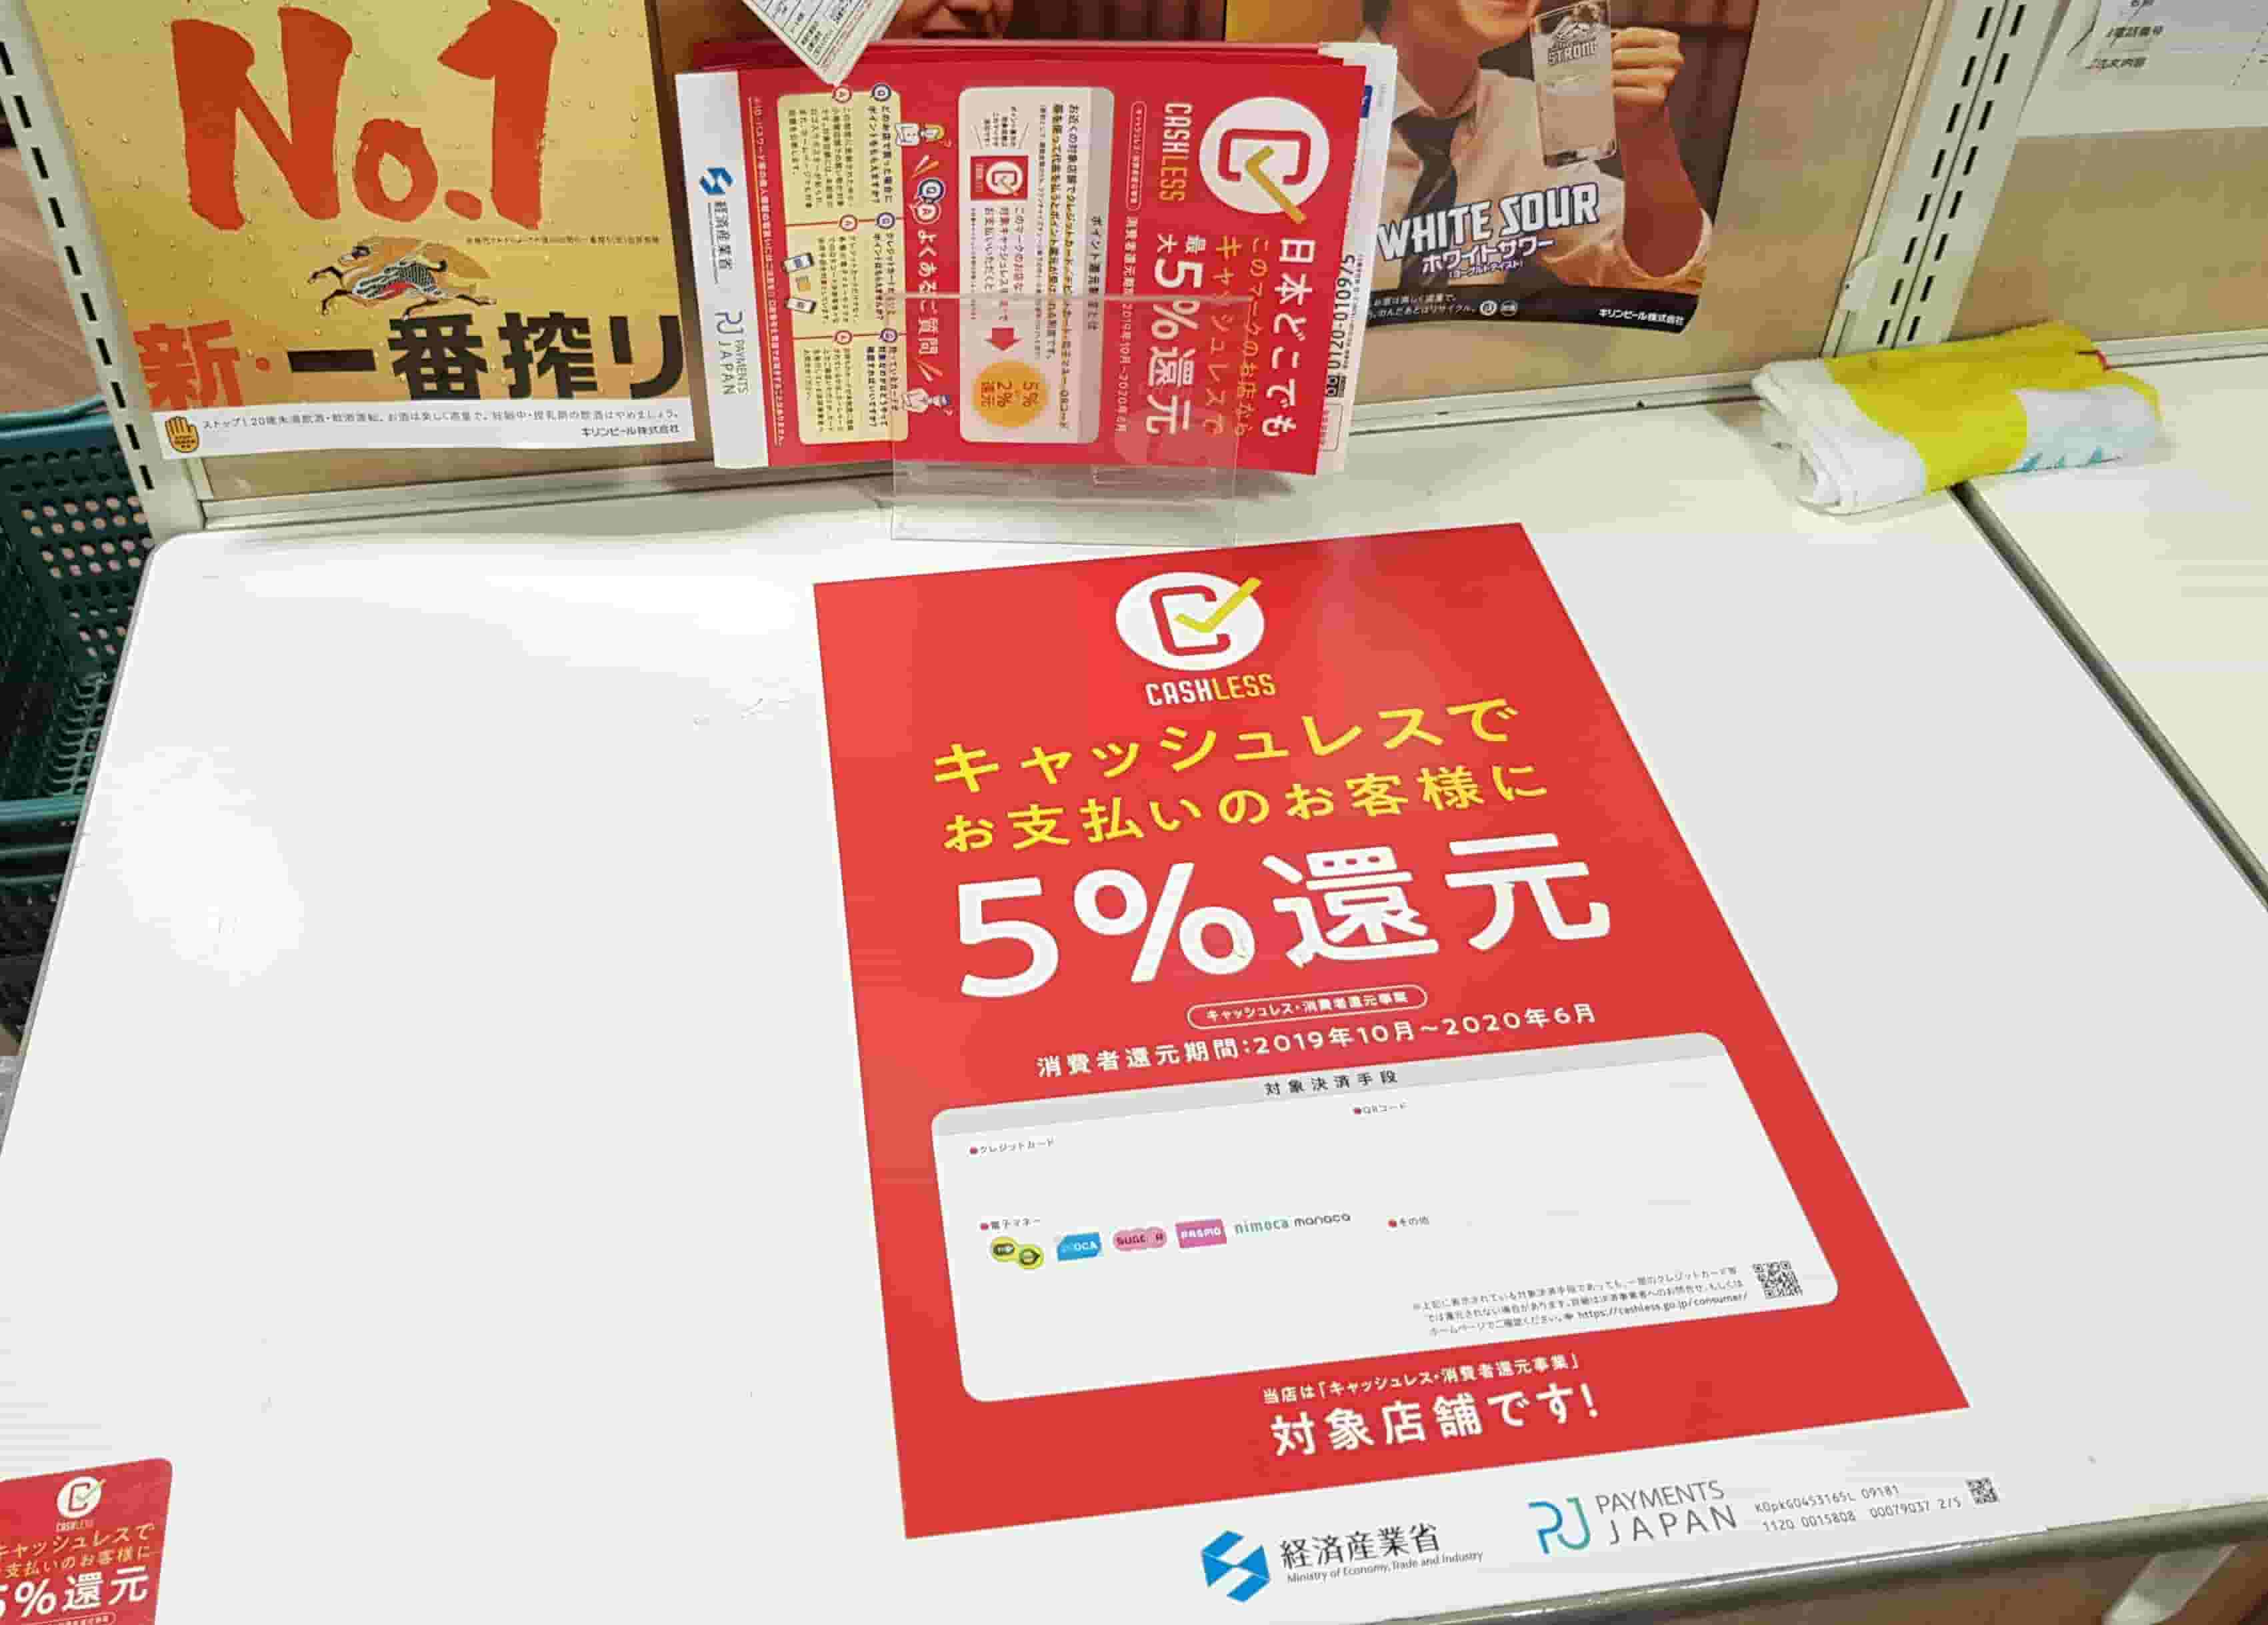 Japan Government is Offering Tax Discounts